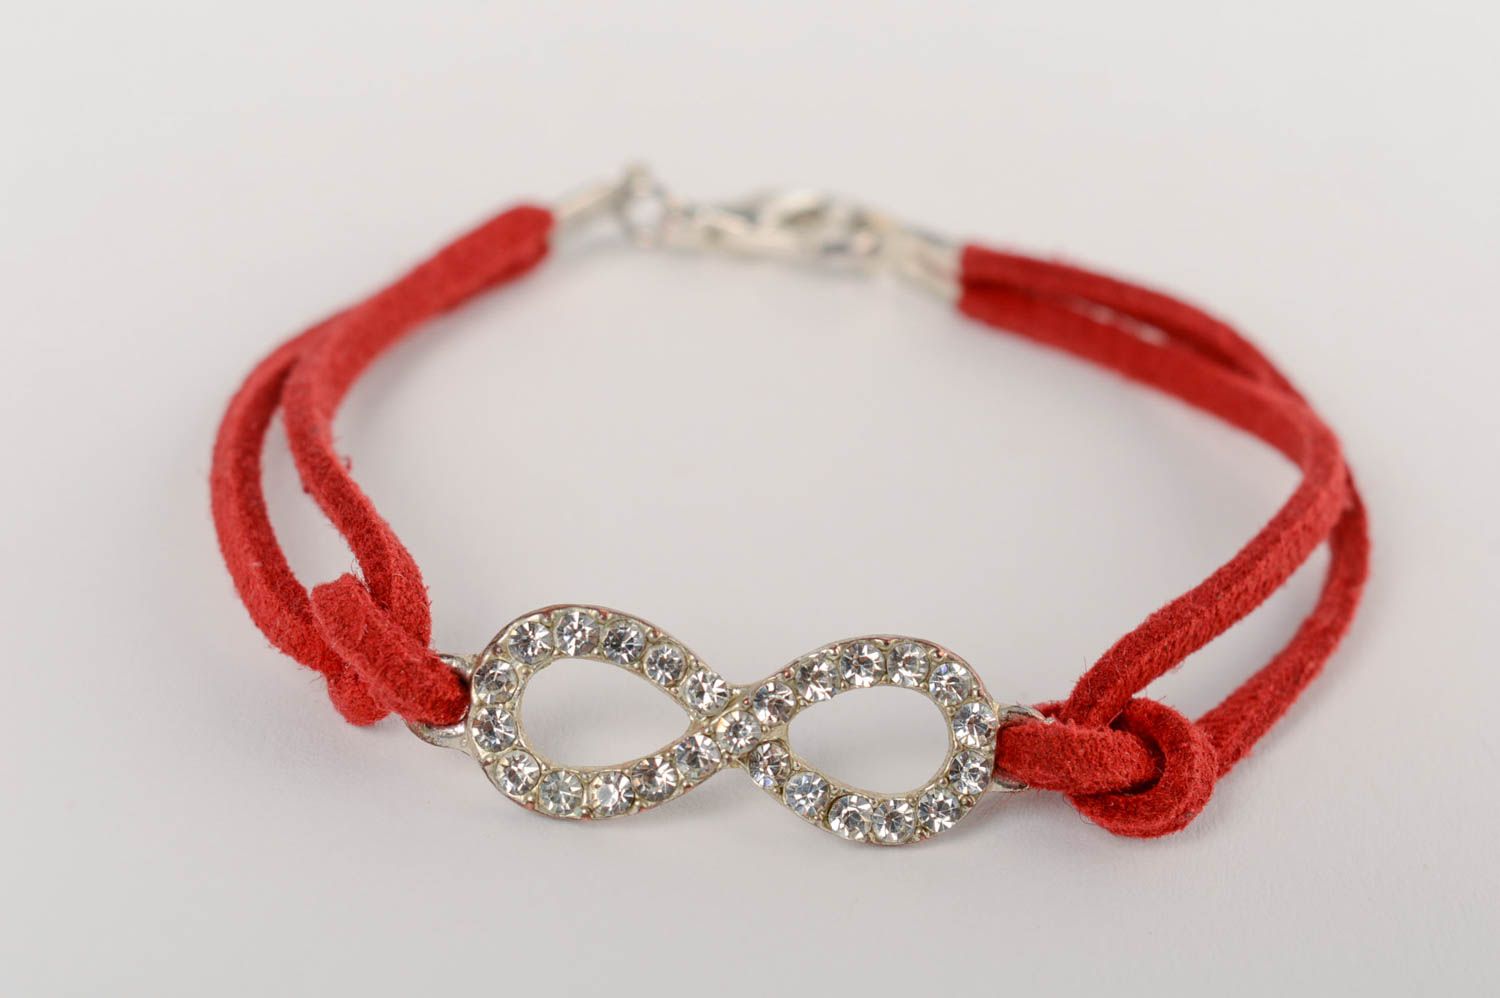 Handmade thin red suede cord bracelet with metal charm infinity sign photo 2